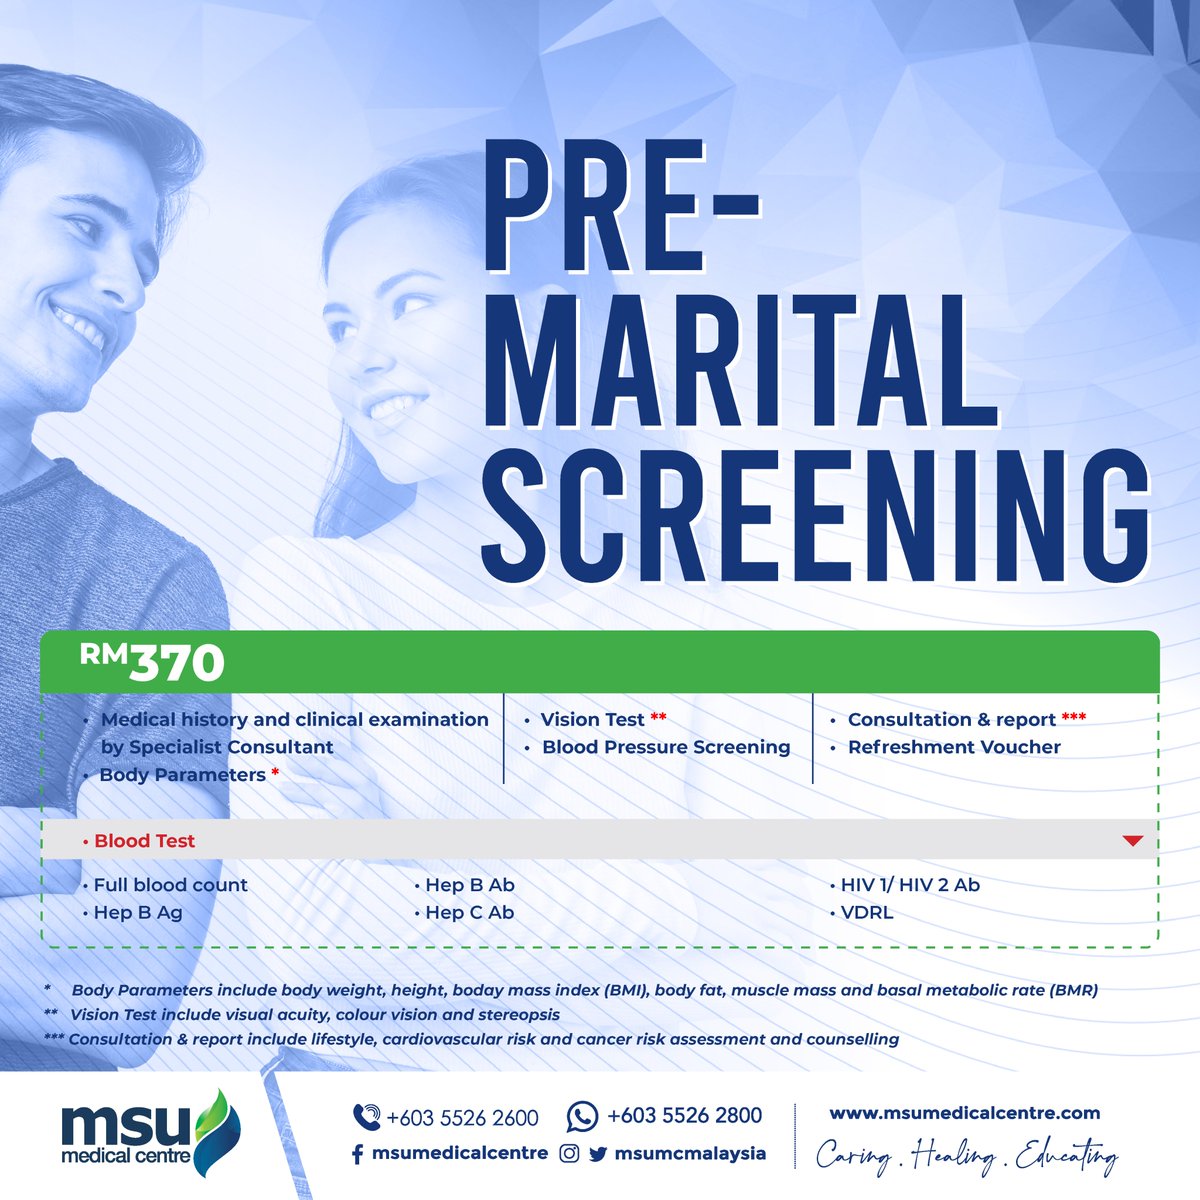 At #MSUMC, we offer comprehensive pre-marital screening packages that serve as an important checklist before your big day.
For more info on our packages and services, kindly contact us at 03-55262600.
#CaringHealingEducating
#PreMaritalScreening